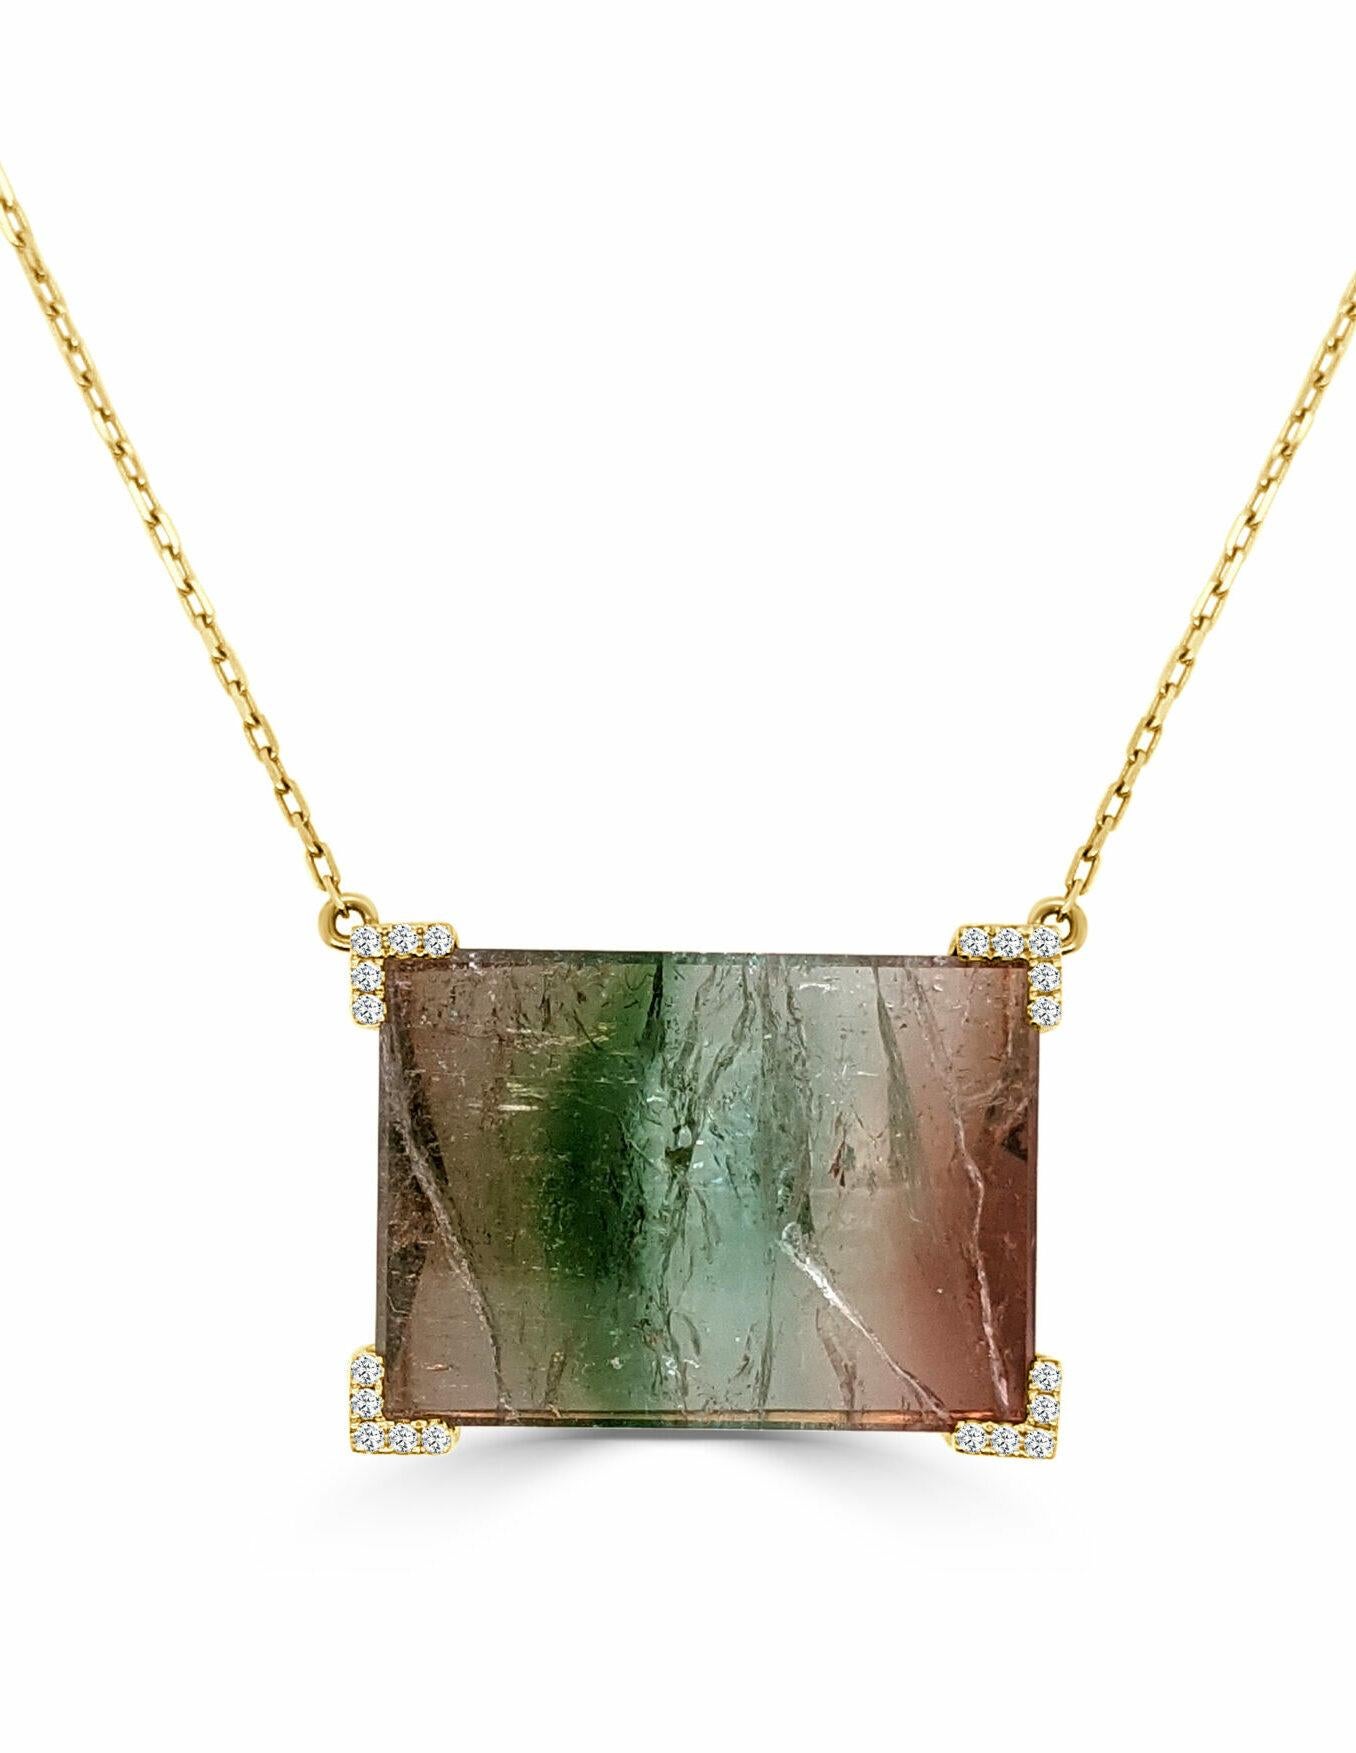 Side Rectangle Rutilated Quartz, Tourmaline & Diamond Pendant With Chain, Rutilated Quartz 29.07 Ct, Diamond 0.12 Ct

Available in other metal/ gemstone options: These Gemstone pieces can be made in white, pink, yellow gold or two-tone.